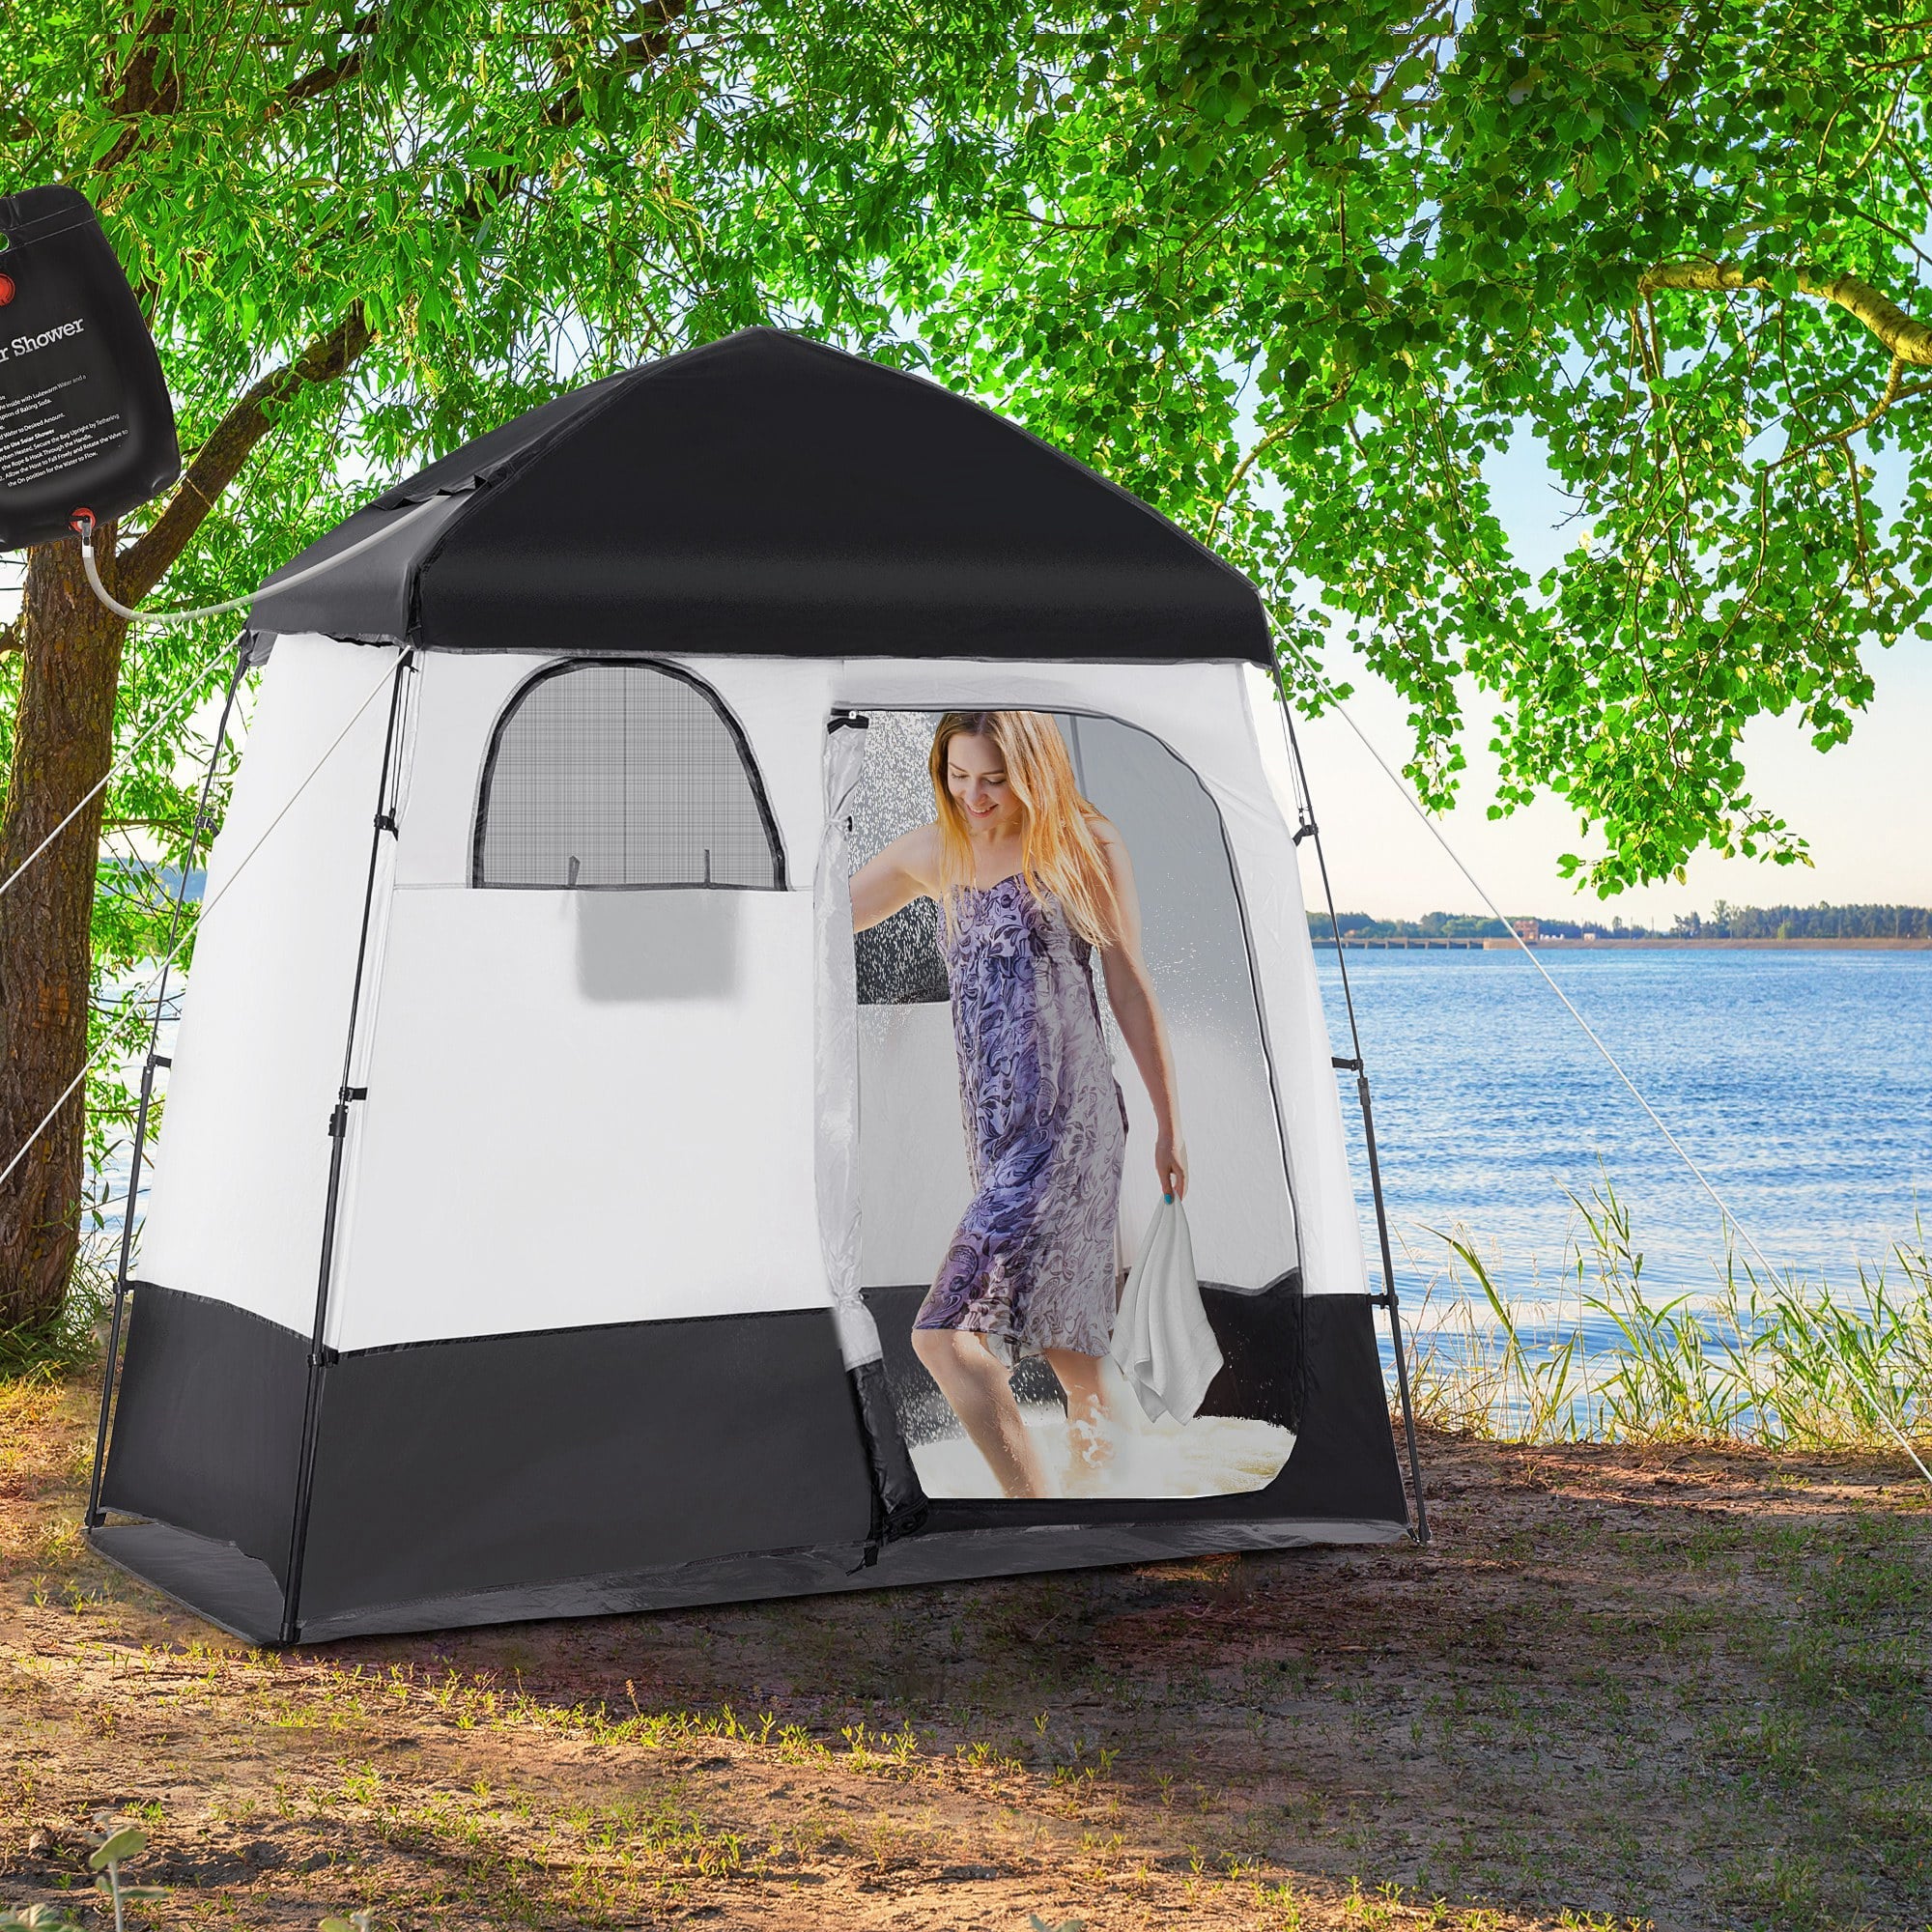 Outsunny Shower Tent, Pop Up Privacy Shelter for Camping, Dressing Changing Room, Portable Instant Outdoor Shower Tent Enclosure w/ 2 Rooms, Shower Bag, Floor and Carrying Bag, Black